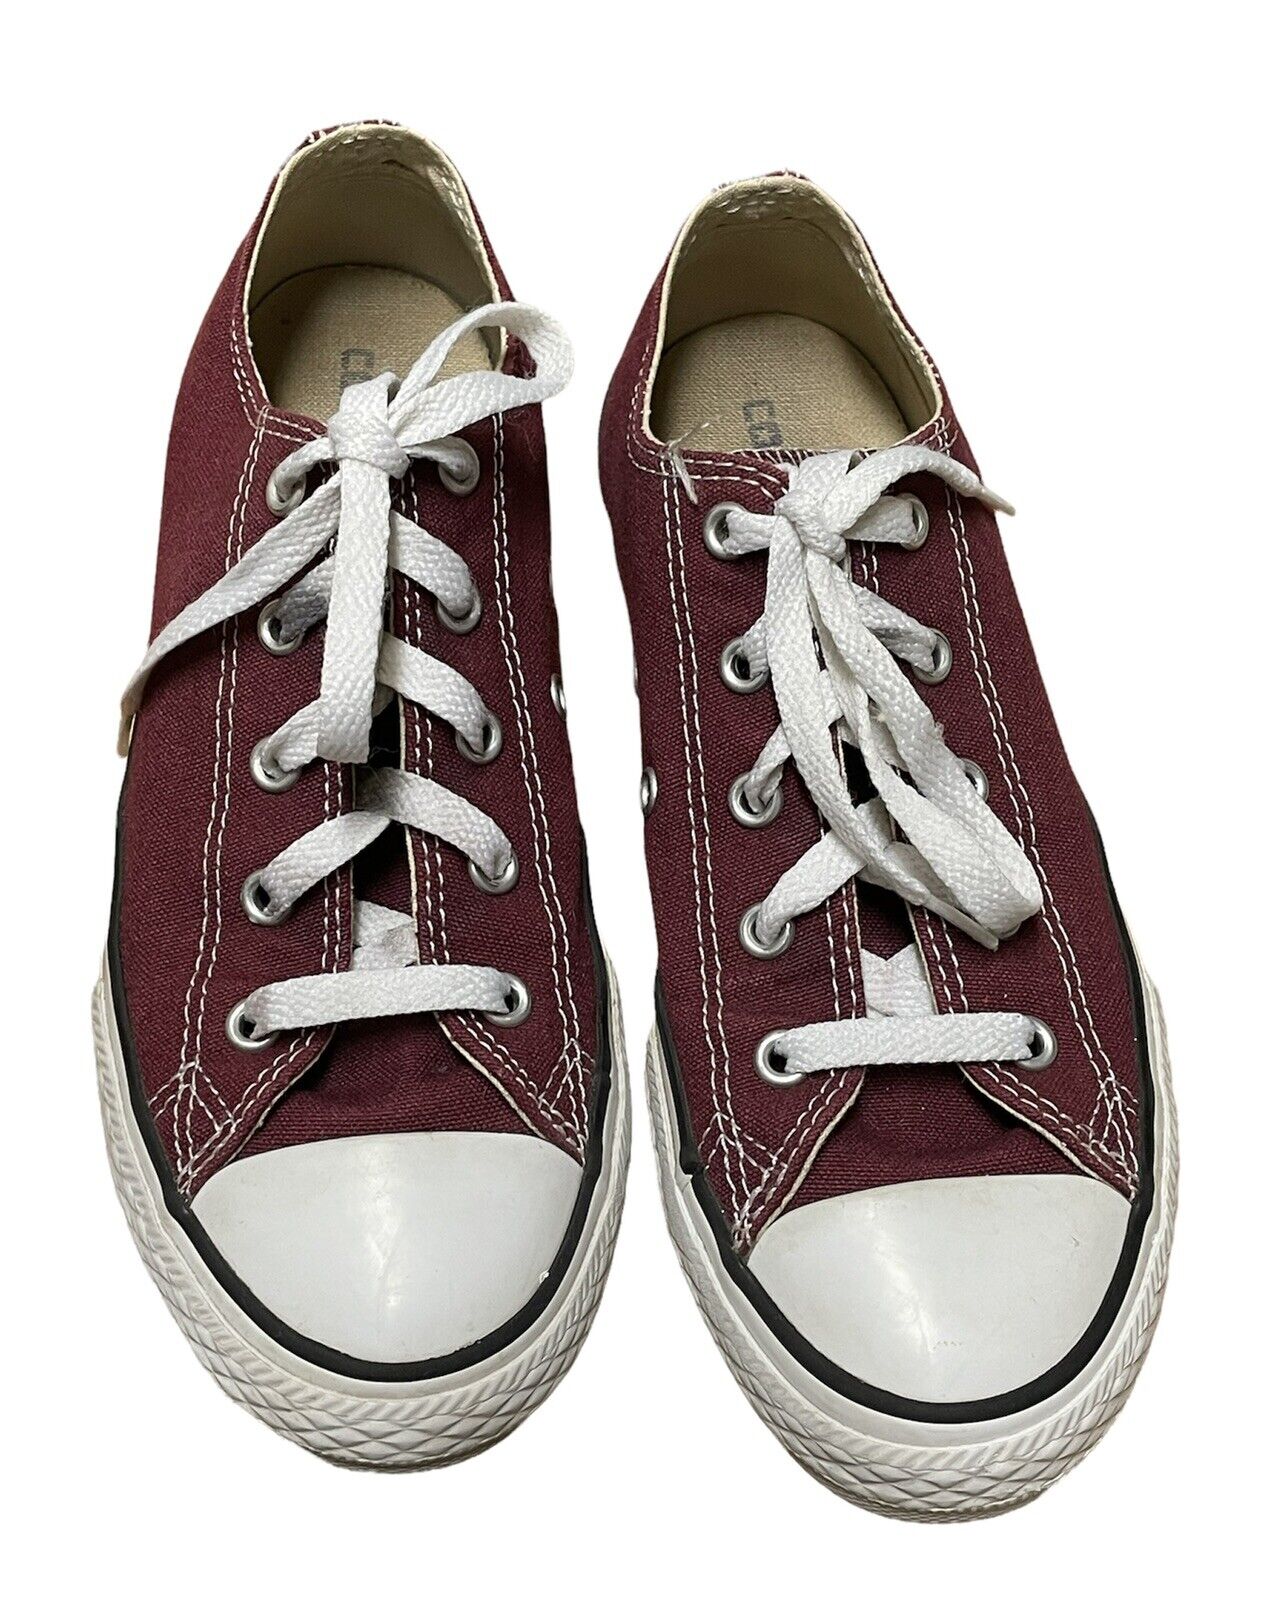 CONVERSE ALL STAR LOW TOP BURGUNDY SHOES. Size Youth 3. | eBay